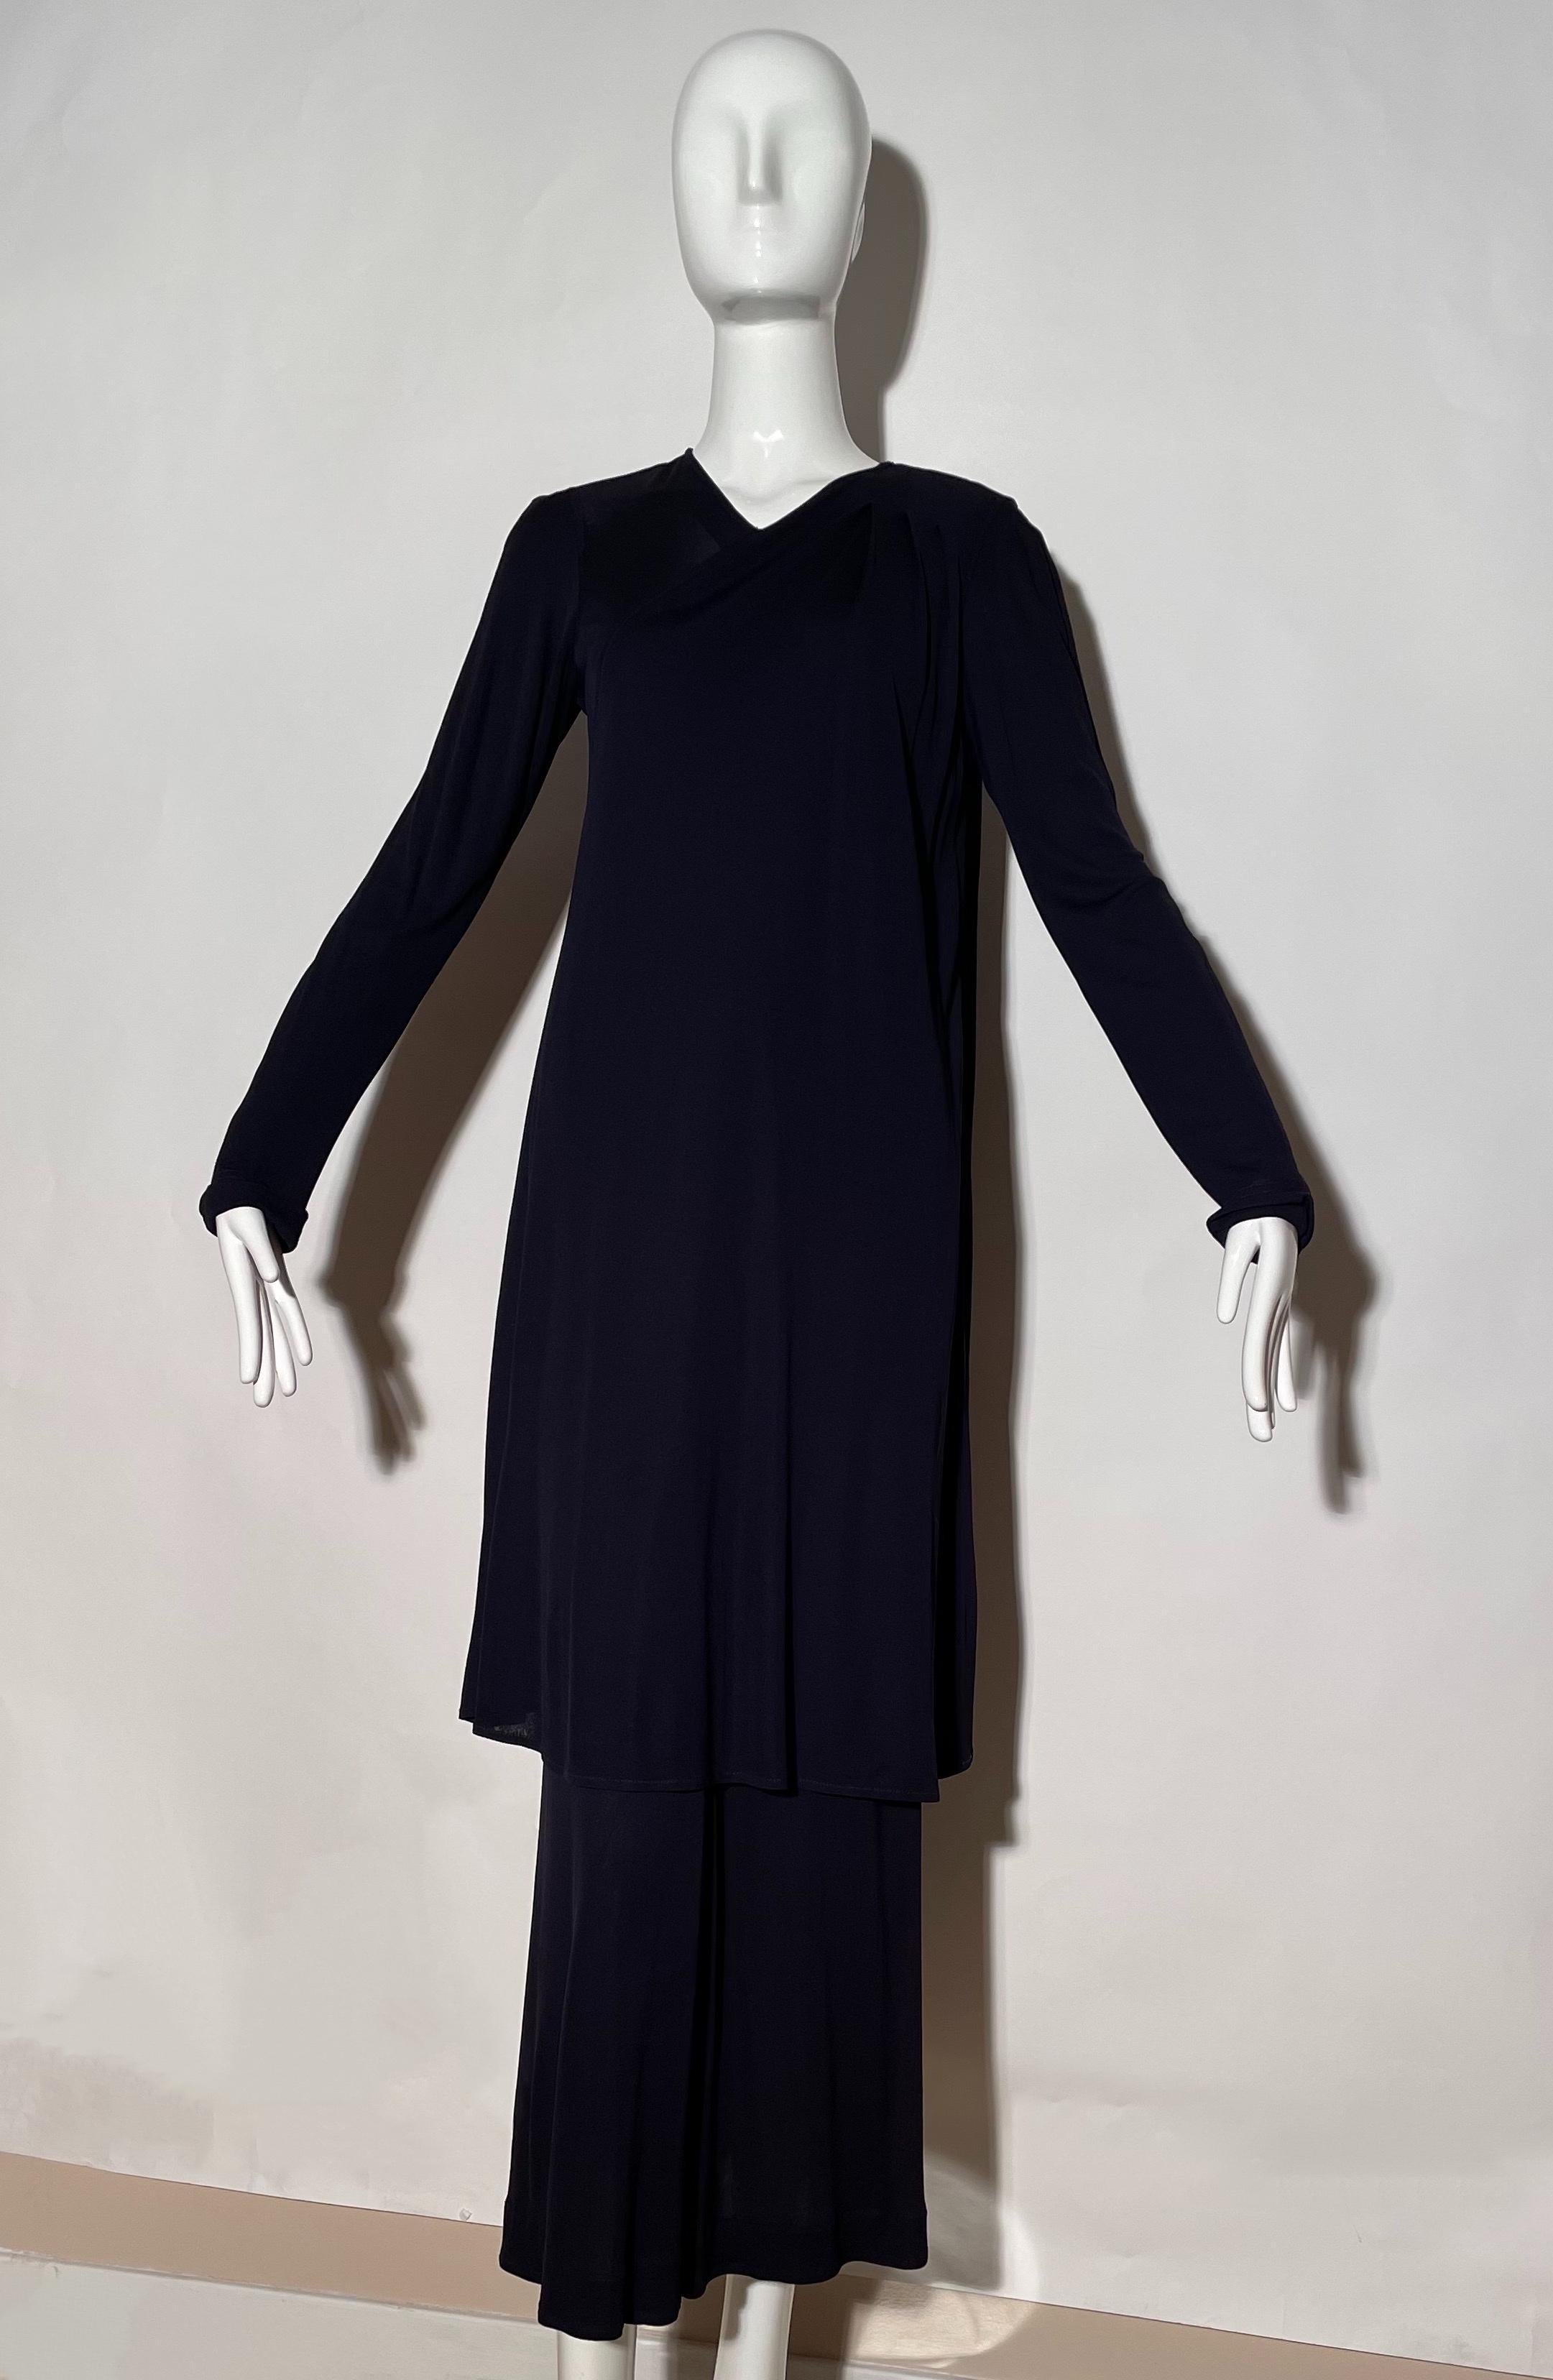 Navy maxi dress. Overlay detail. Longsleeve. Rear button closure. Viscose. Made in England. 
*Condition: great vintage condition. Light discoloration on shoulders ( as pictured ) , unnoticeable.

Measurements Taken Laying Flat (inches)—
Shoulder to